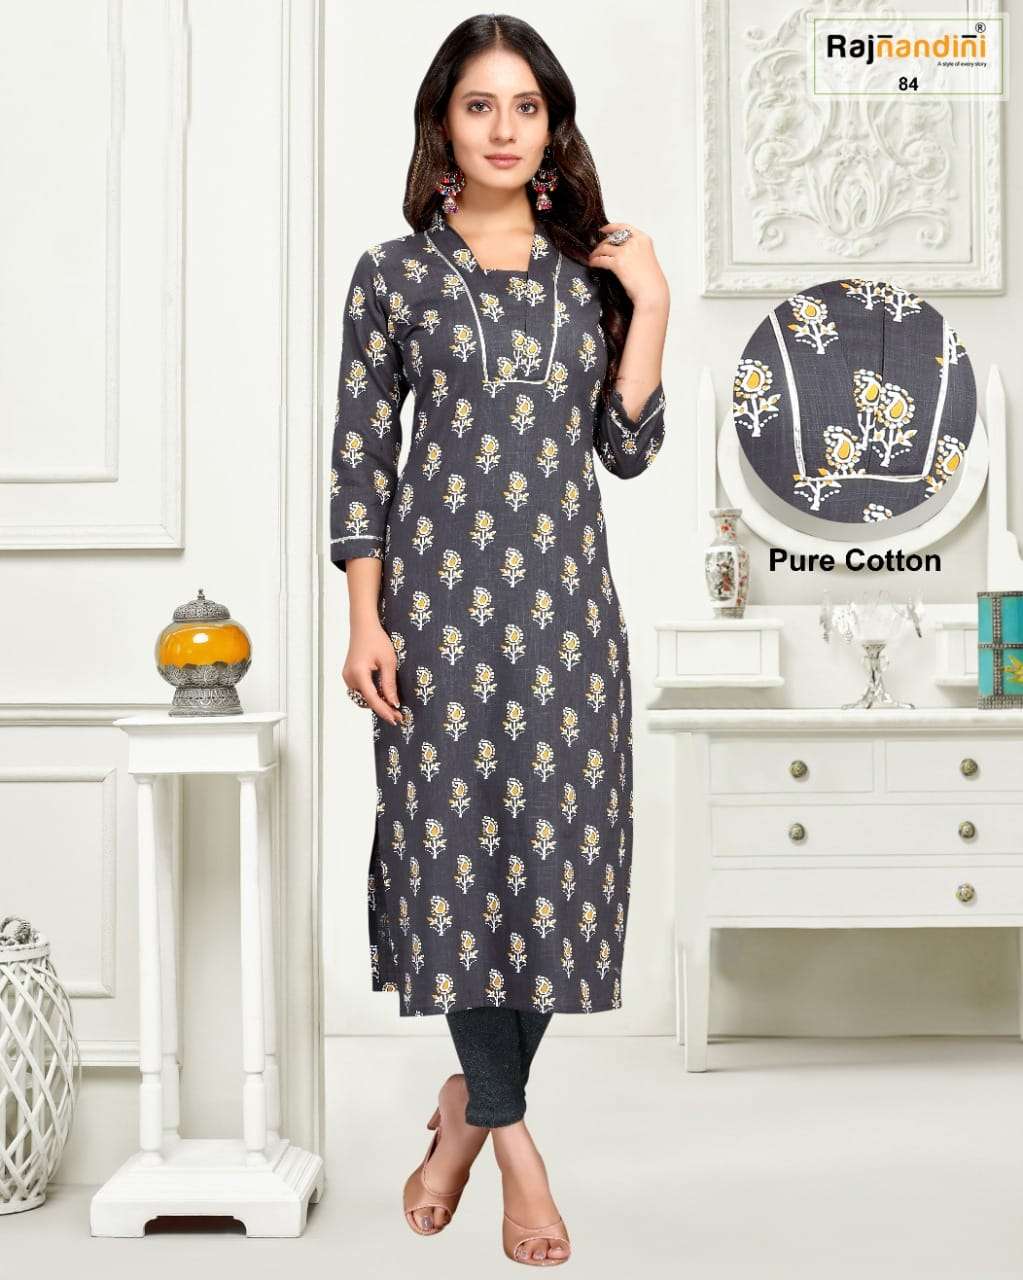 PRINT VOL-28 BY RAJNANDINI 83 TO 86 SERIES DESIGNER STYLISH FANCY COLORFUL BEAUTIFUL PARTY WEAR & ETHNIC WEAR COLLECTION PURE COTTON PRINT KURTIS AT WHOLESALE PRICE